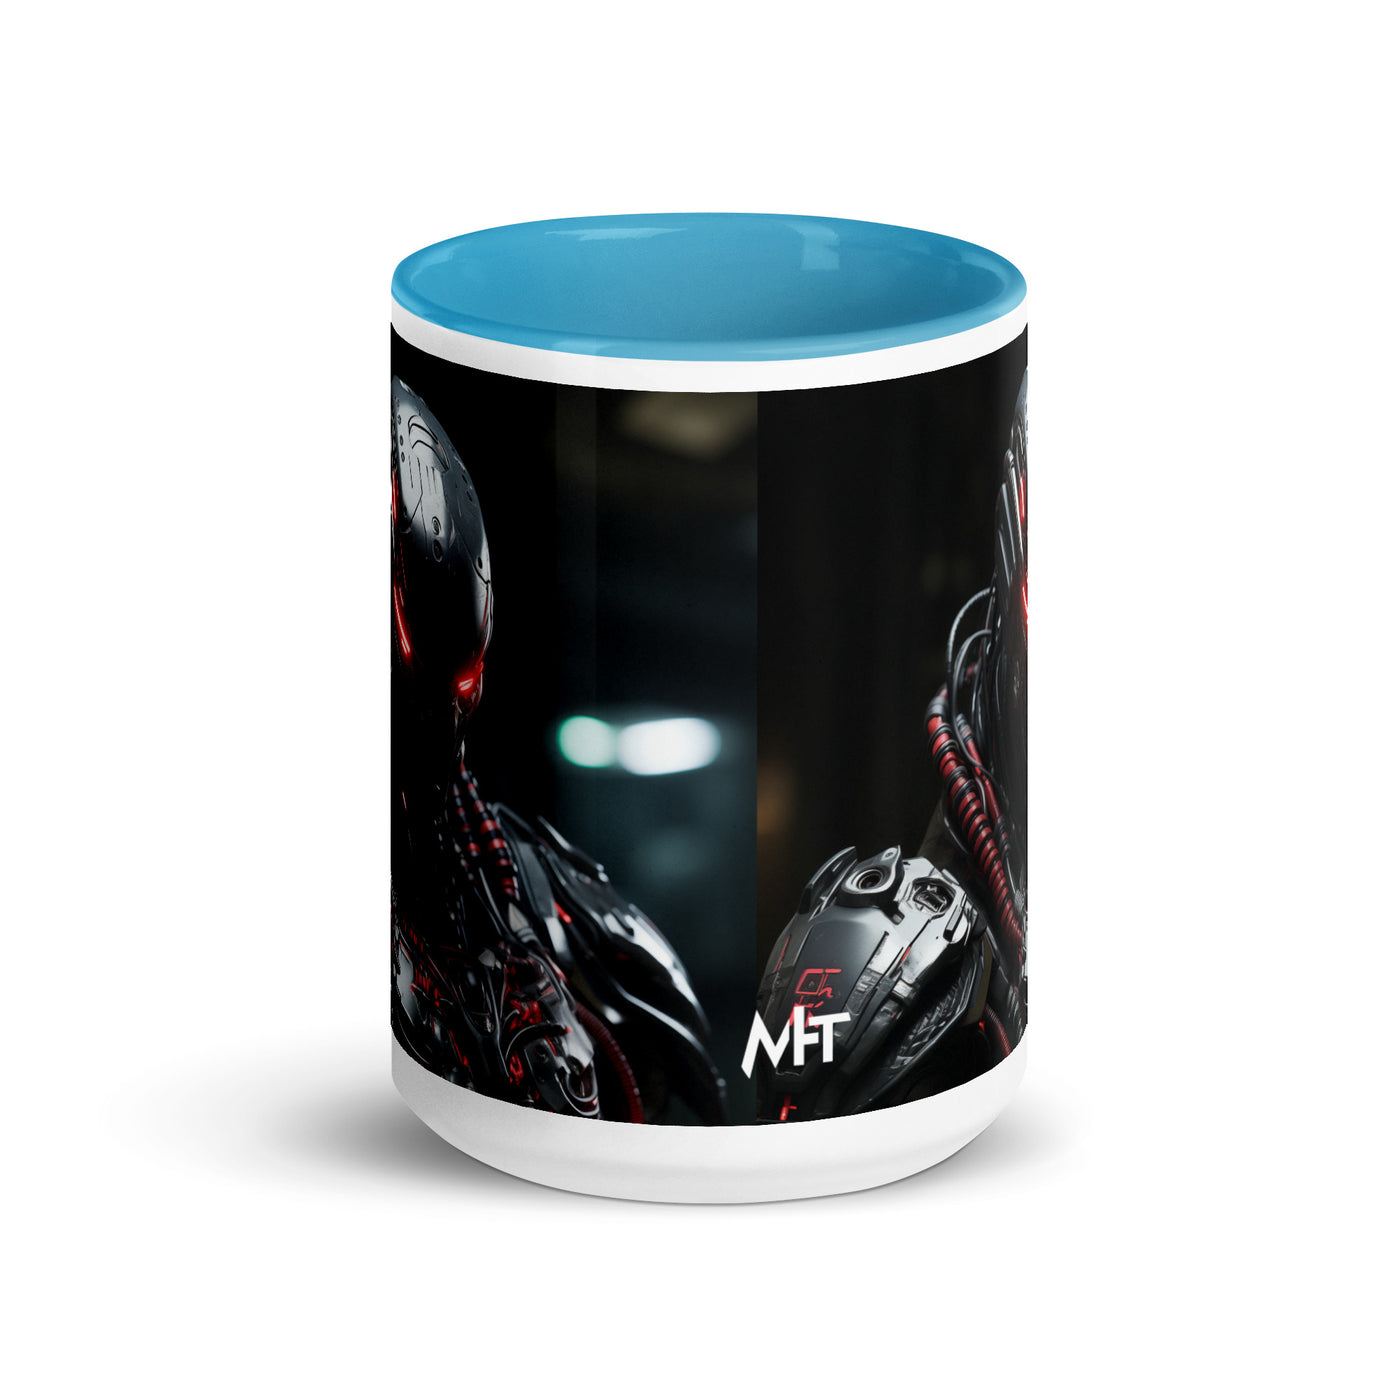 CyberArms Warrior - Mug with Color Inside